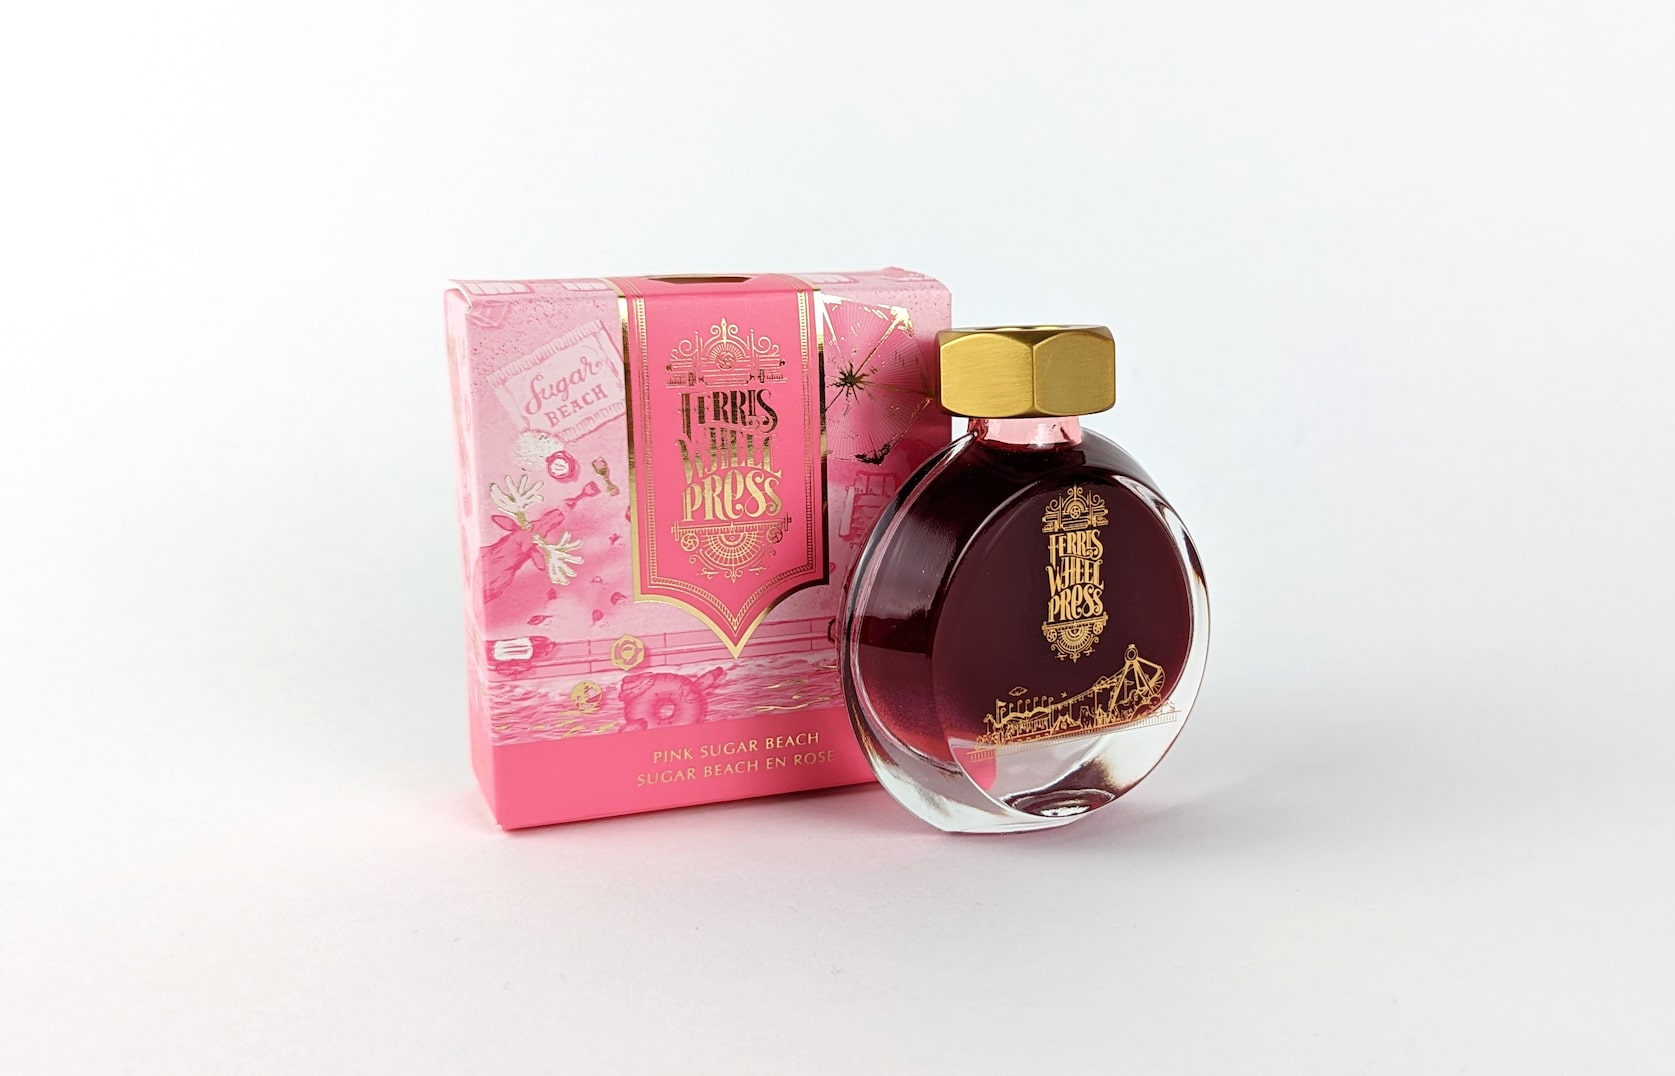 An ornate pink & gold cardboard box with gold text that reads Ferris Wheel Press: Pink Sugar Beach. Sugar Beach en Rose. Beside the box there is a round glass bottle of ink with a gold lid. On the bottle there is a small gold illustration featuring a merry-go-round and circus tent.